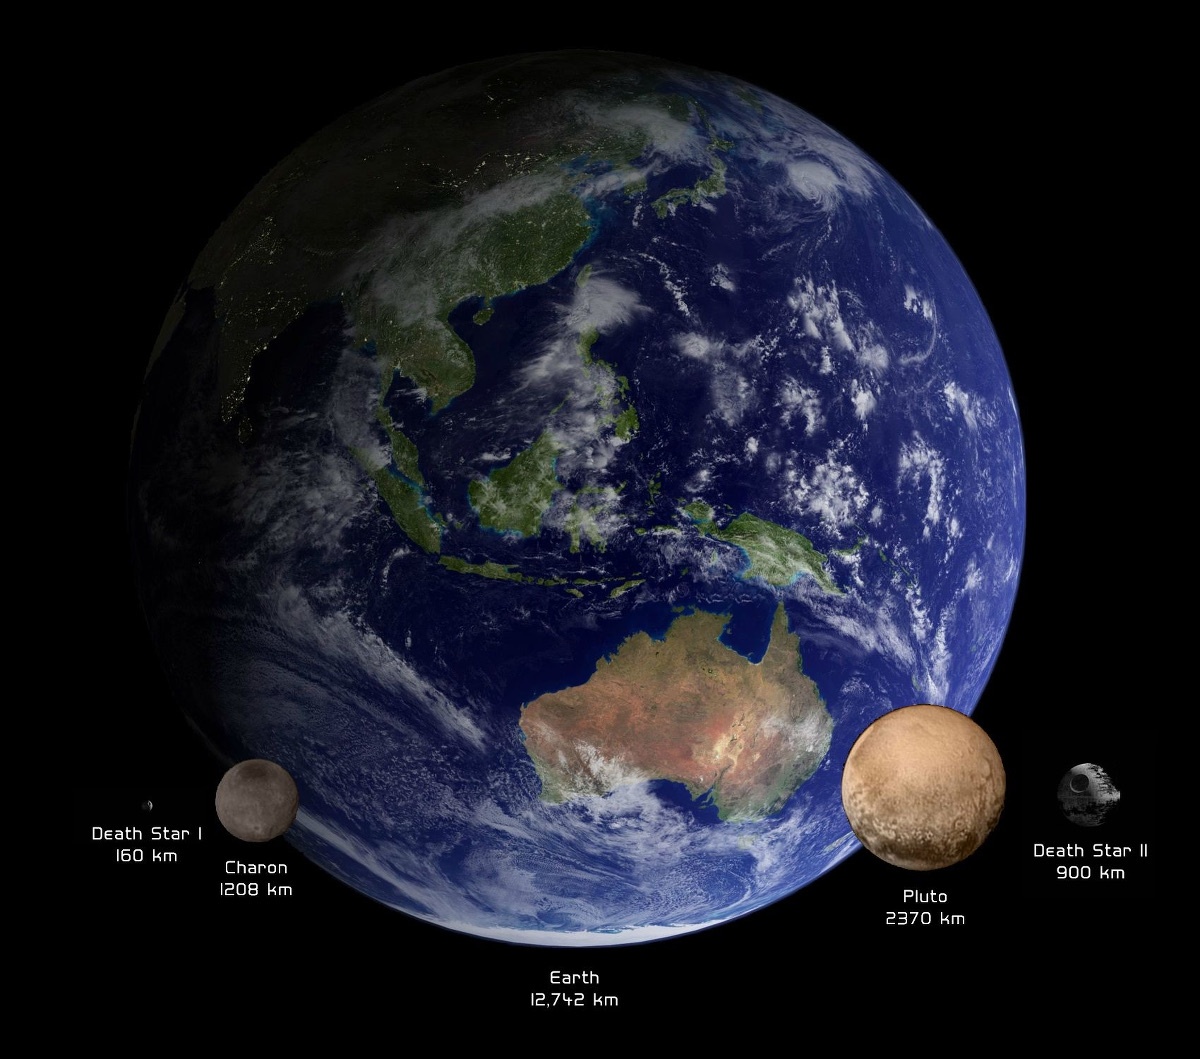 size of Pluto and other objects relative to Earth